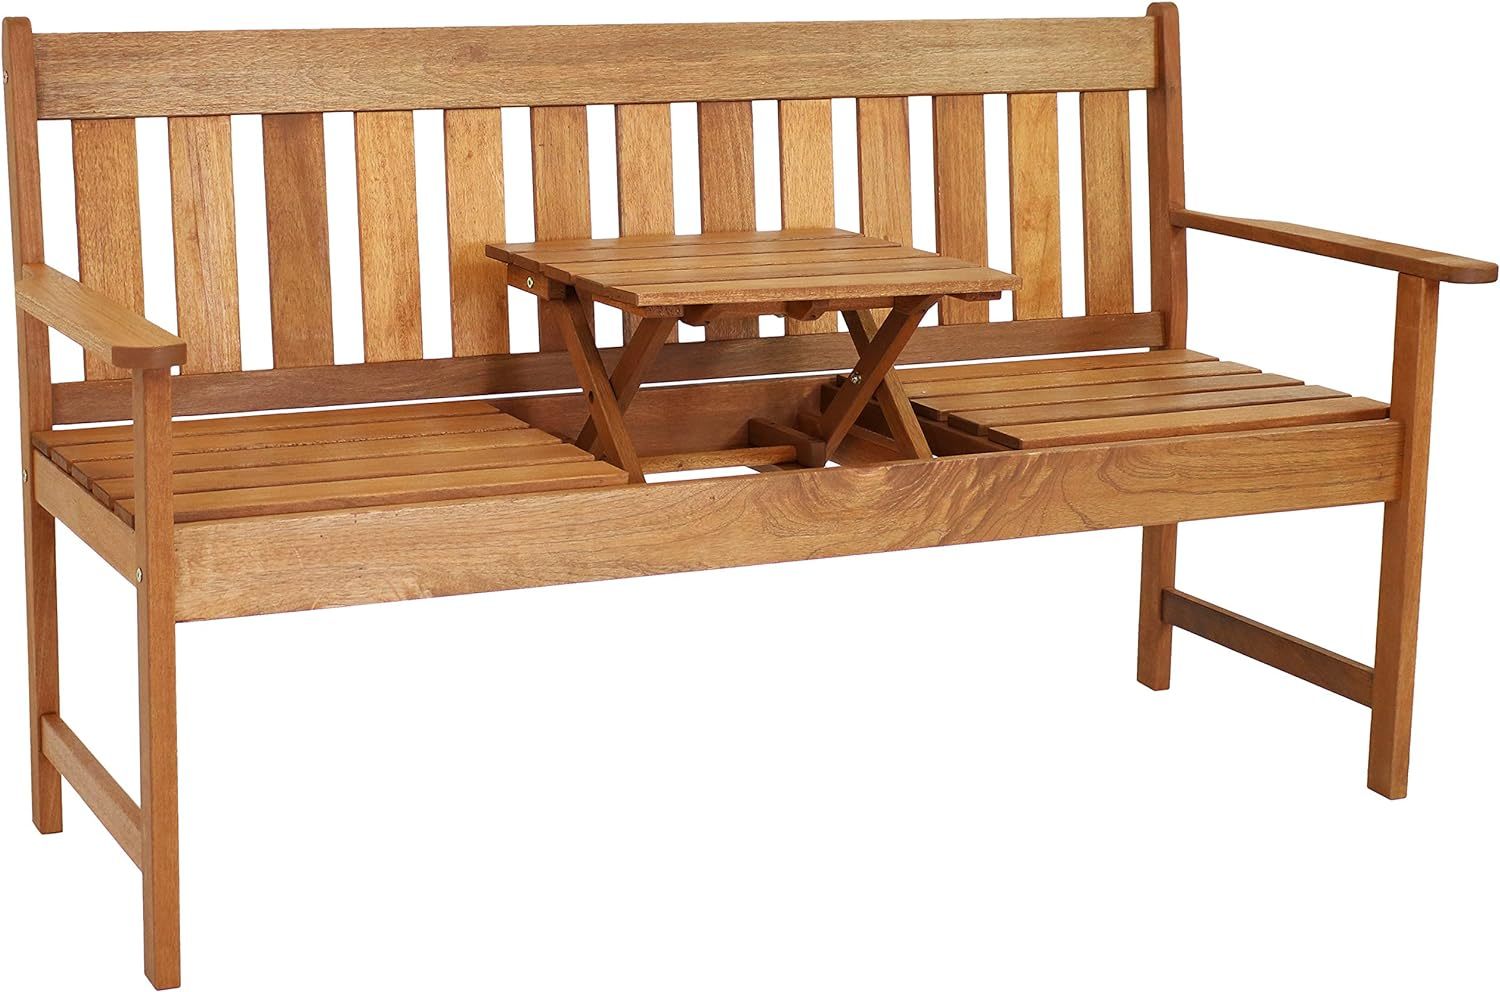 Primary image for Sunnydaze Meranti Wood Outdoor Patio Bench With Built-In Pop-Up Table -, Inch